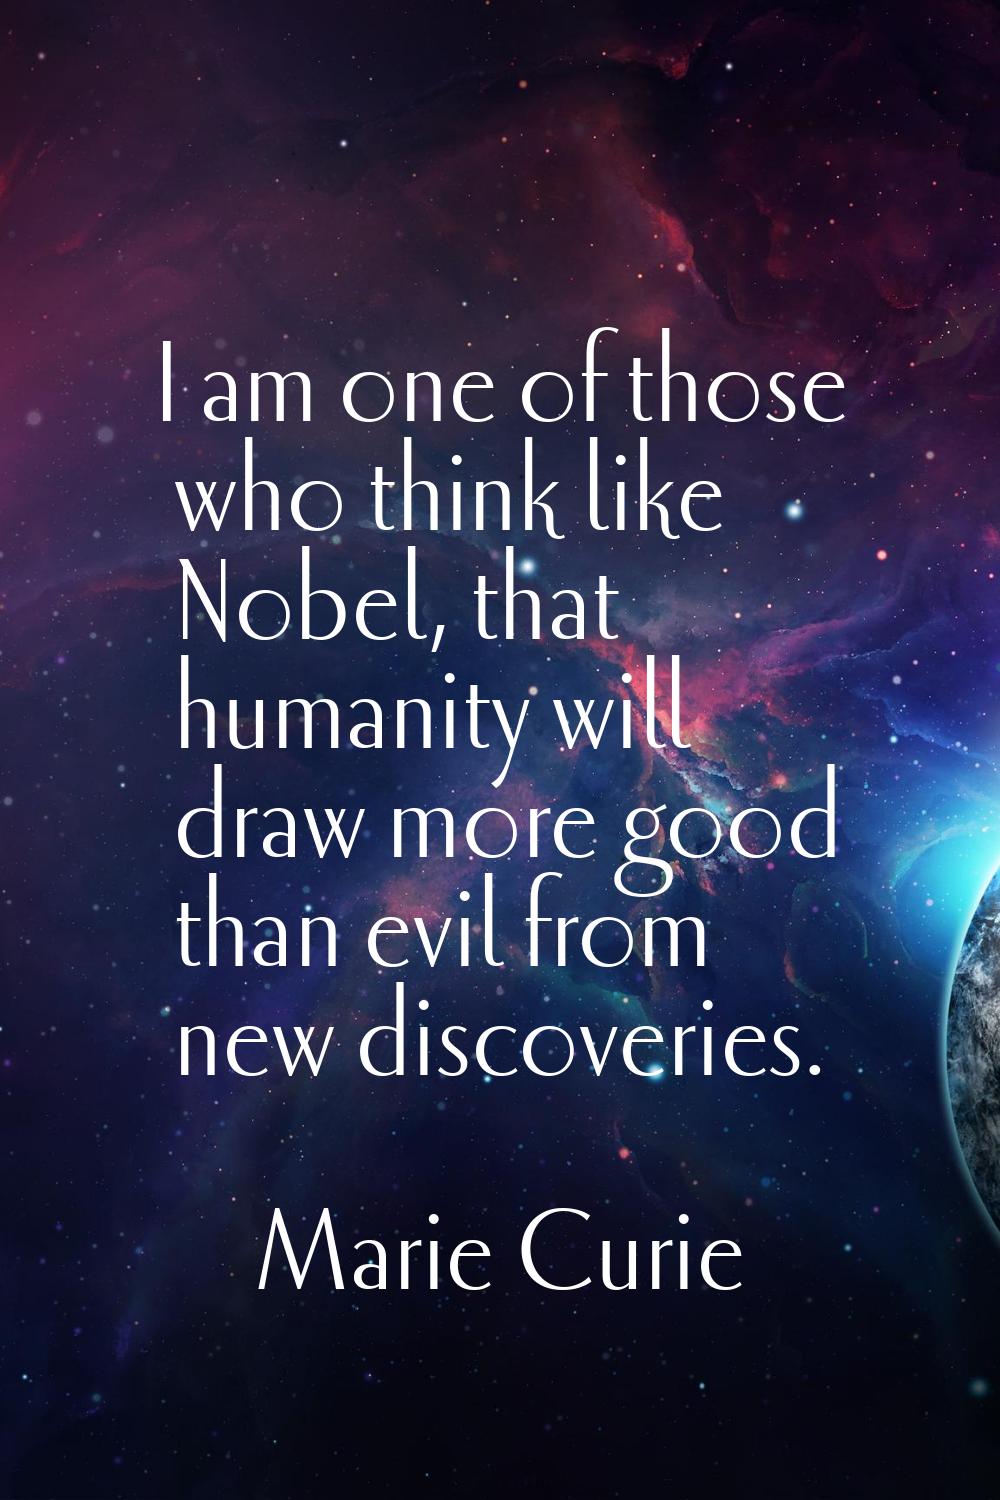 I am one of those who think like Nobel, that humanity will draw more good than evil from new discov